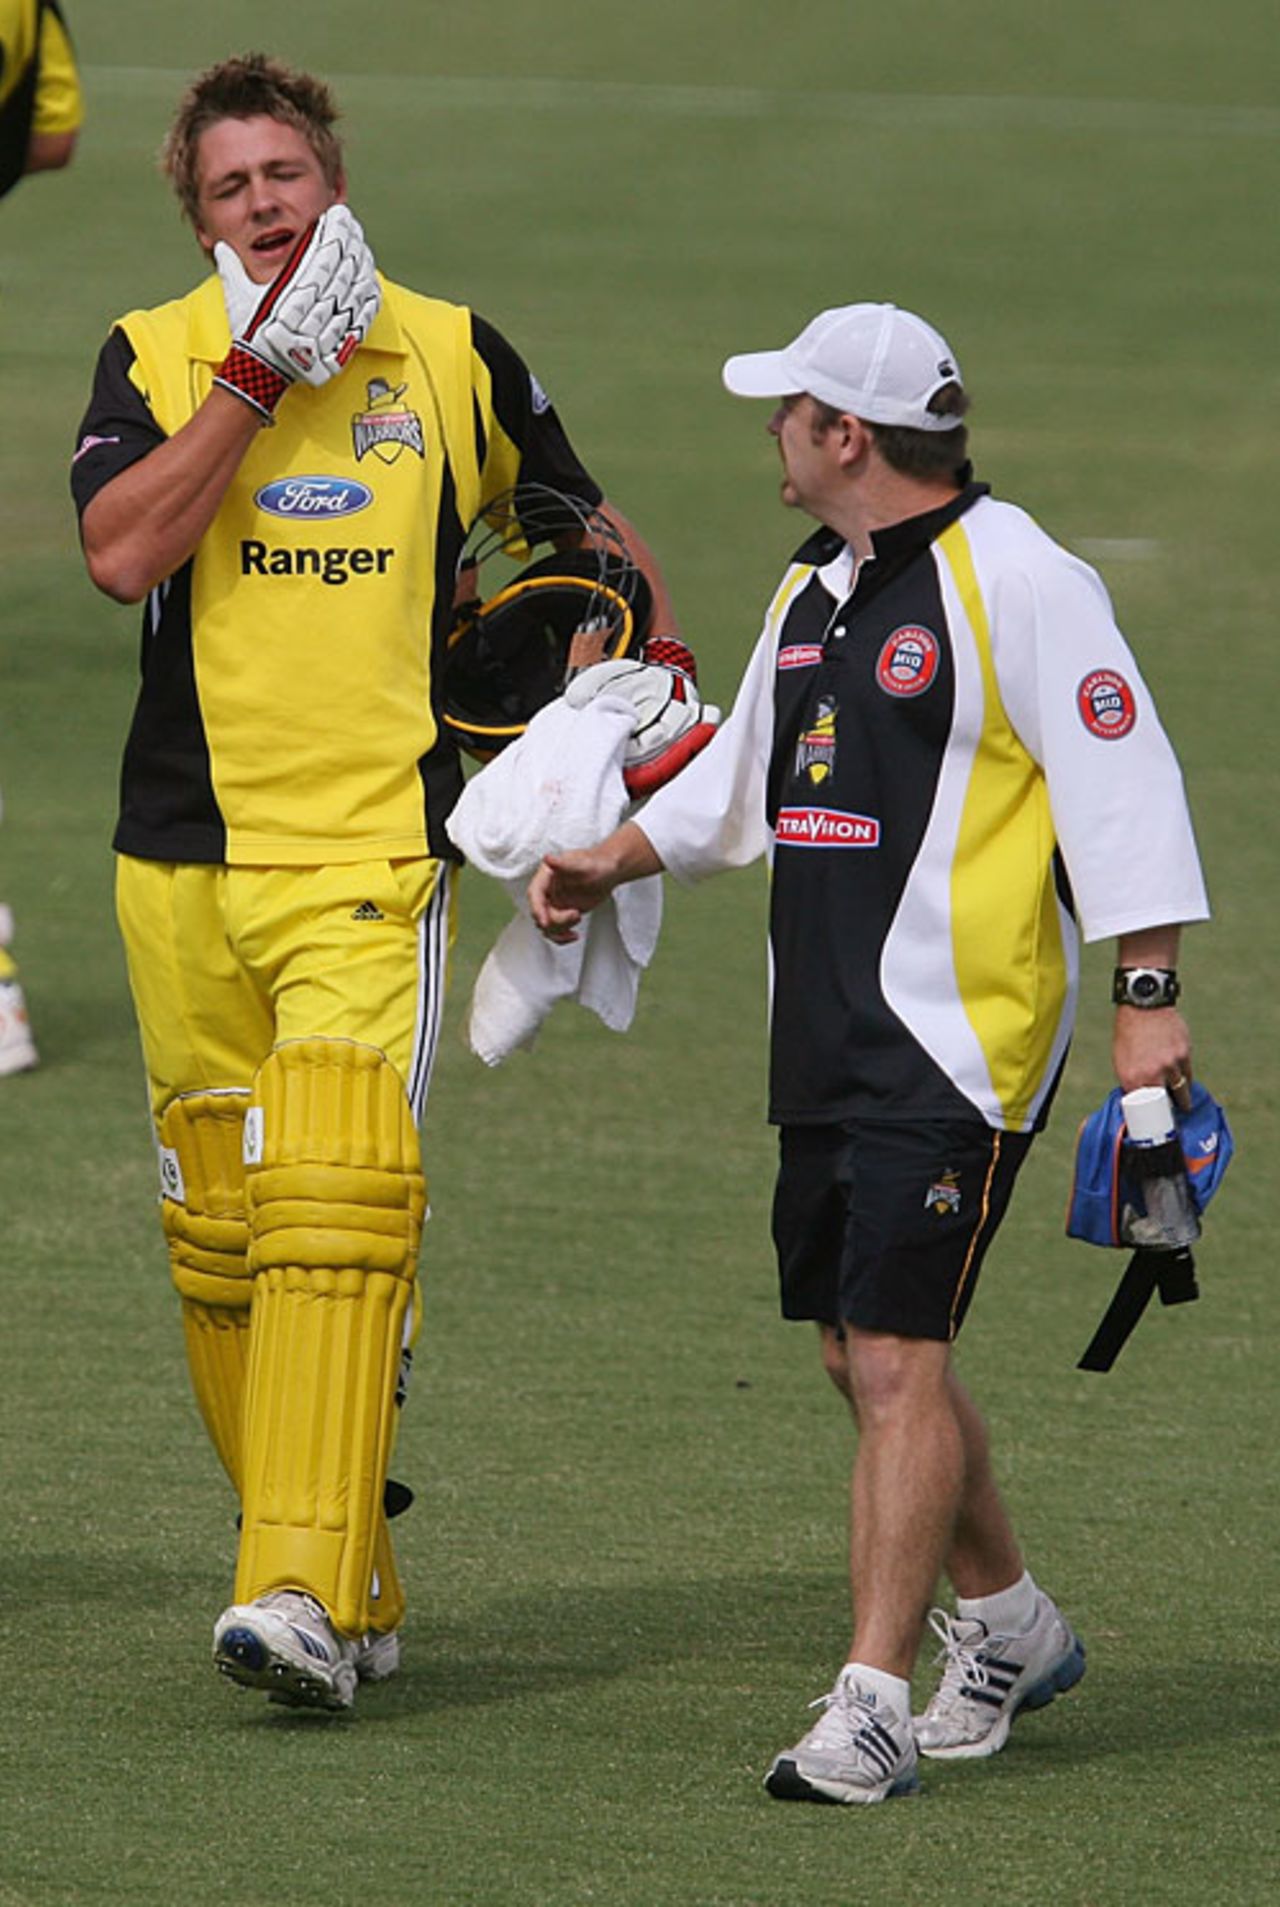 Matt Johnston leaves the field with a broken jaw after being hit by a wayward throw, South Australia v Western Australia, FR Cup, Adelaide, November 21, 2007